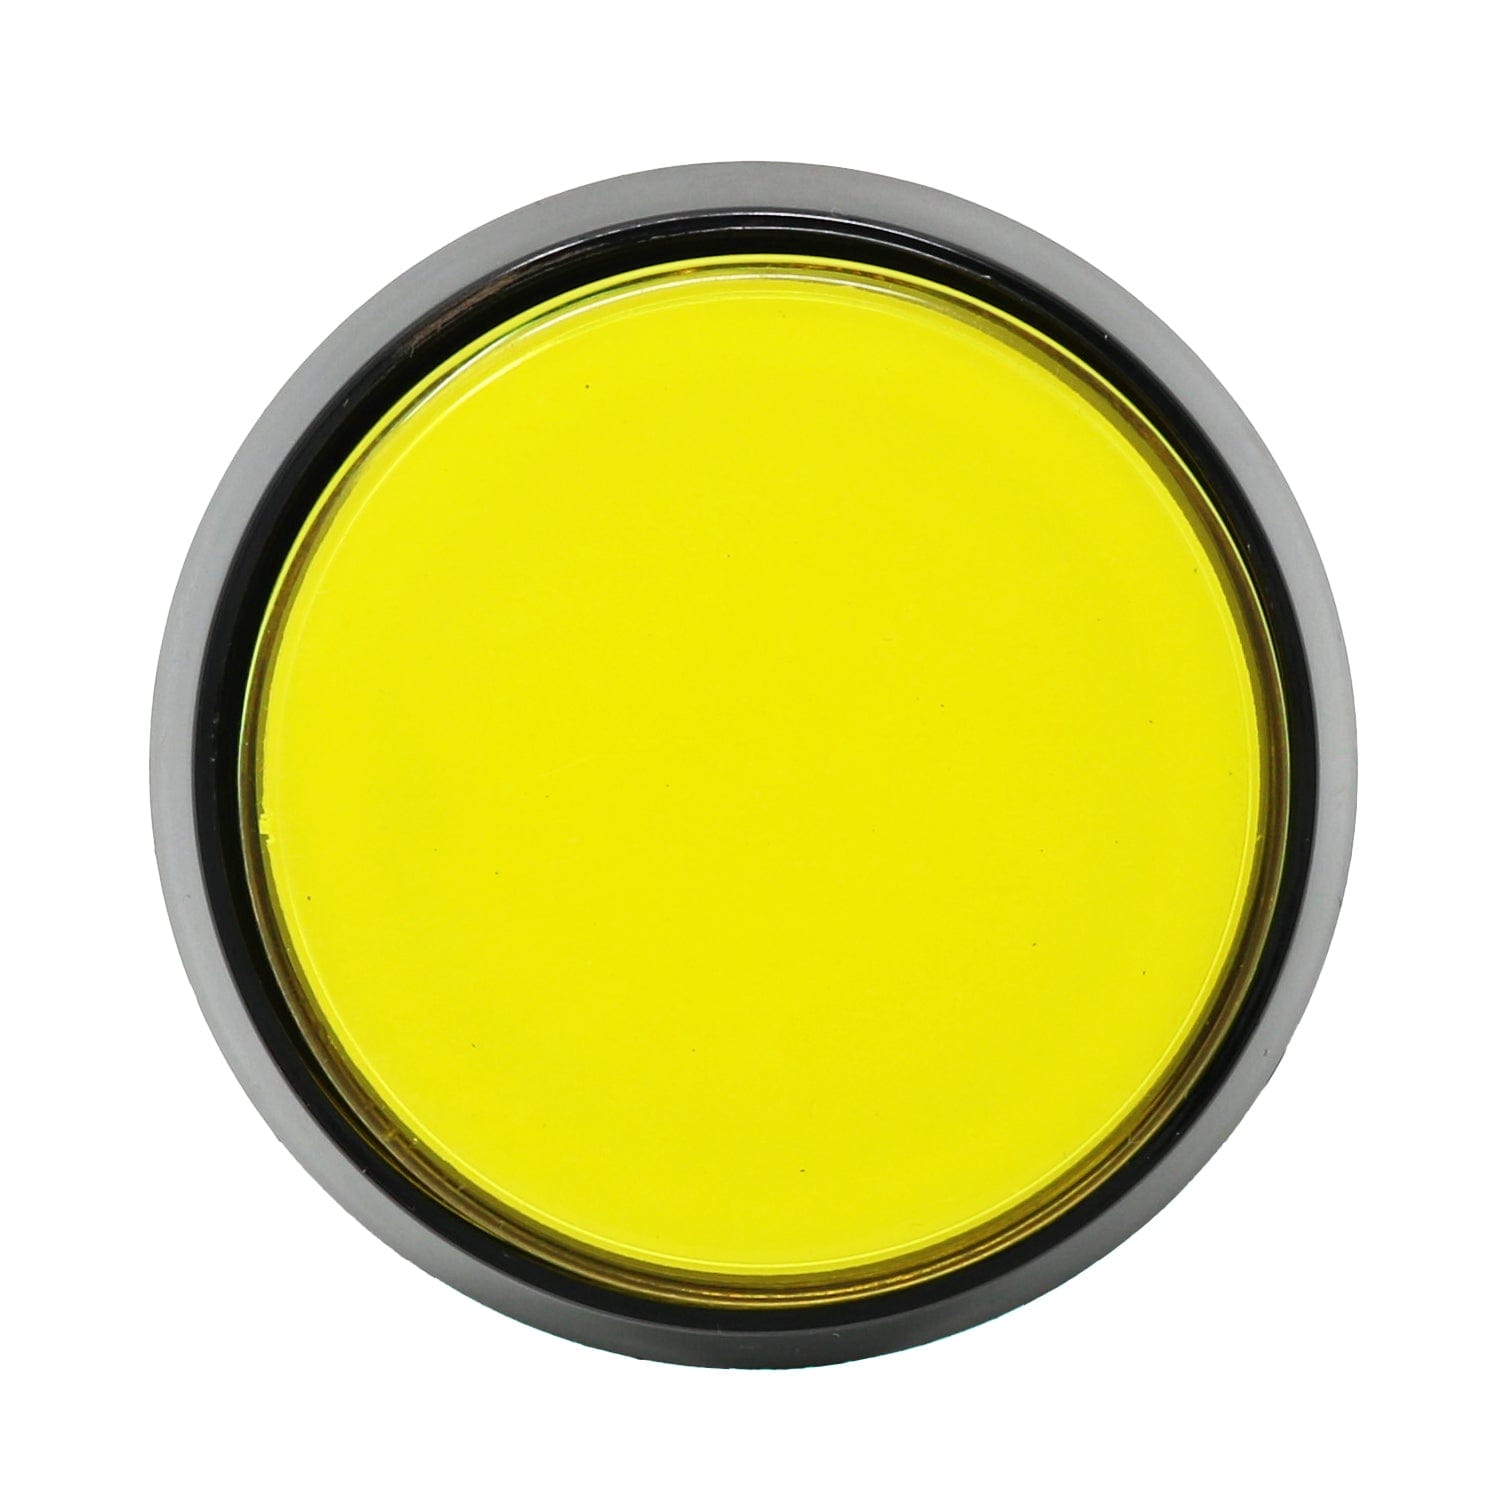 Large Arcade Button with LED - 60mm Yellow - The Pi Hut